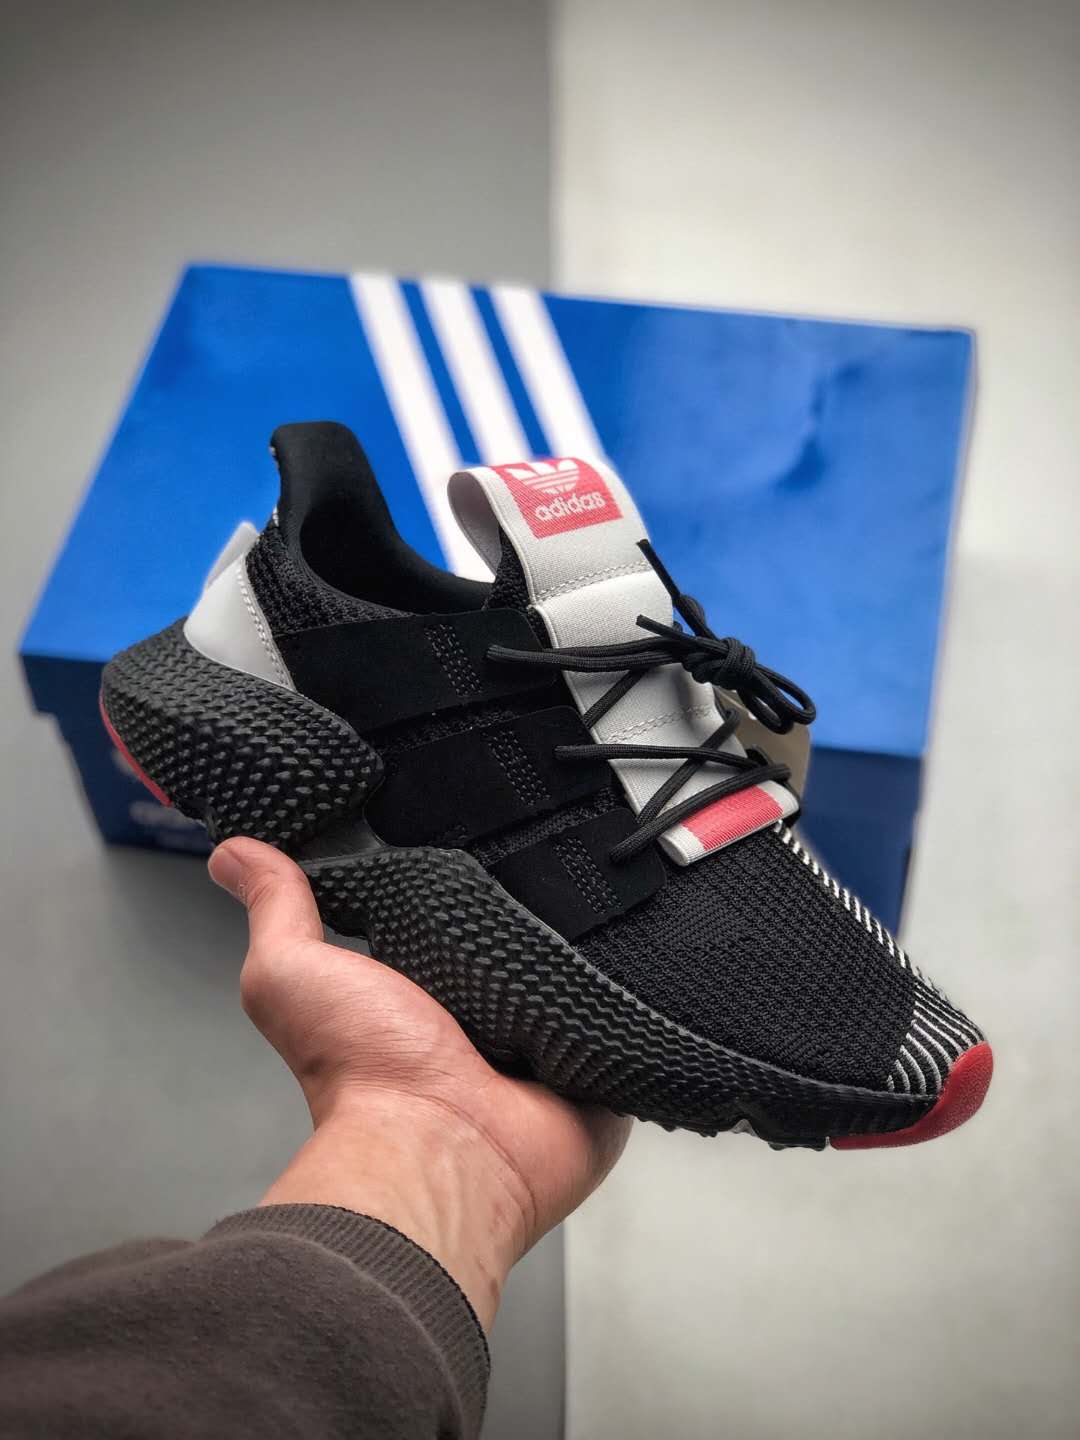 Adidas Originals PROPHERE EH0949: Stylish Sneakers for Modern Fashionistas